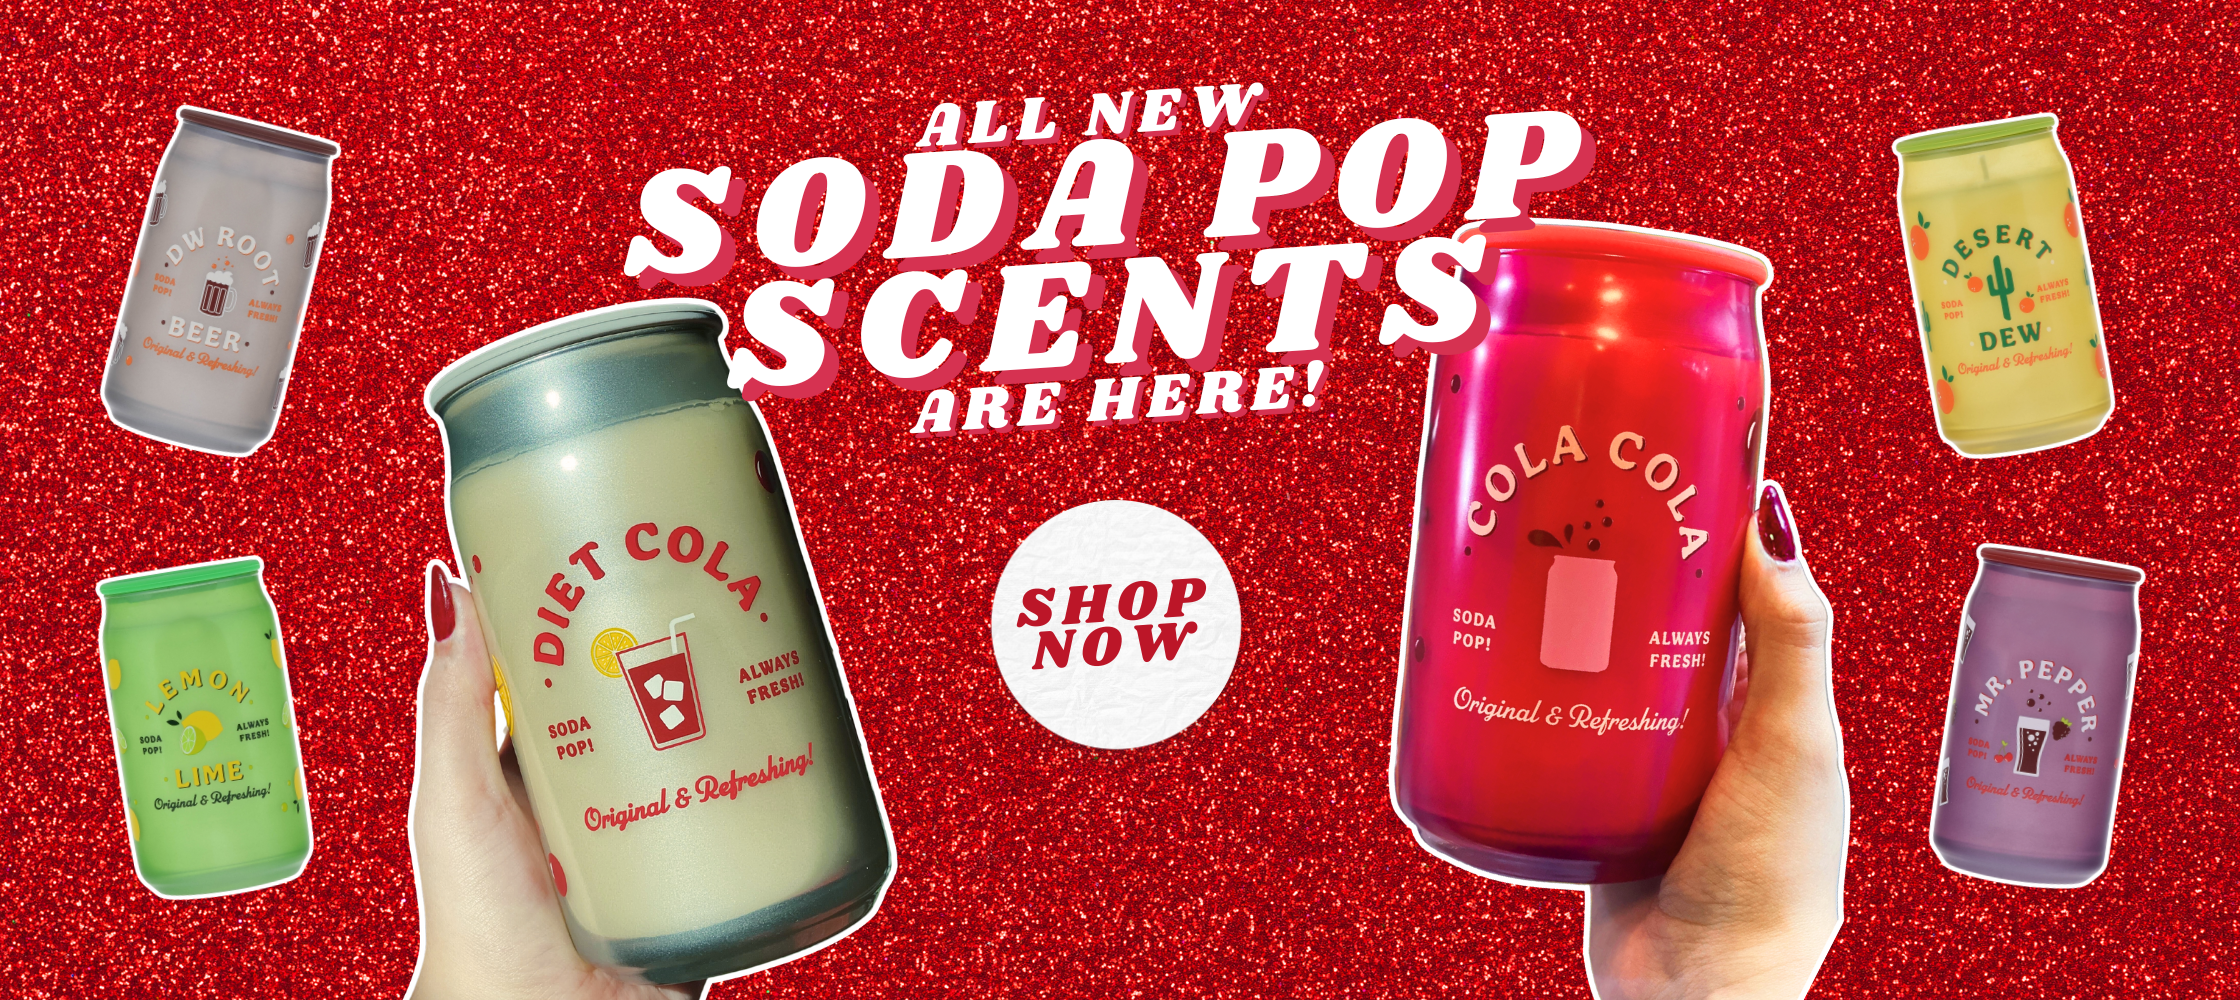 All new soda pop scents are here! Shop now